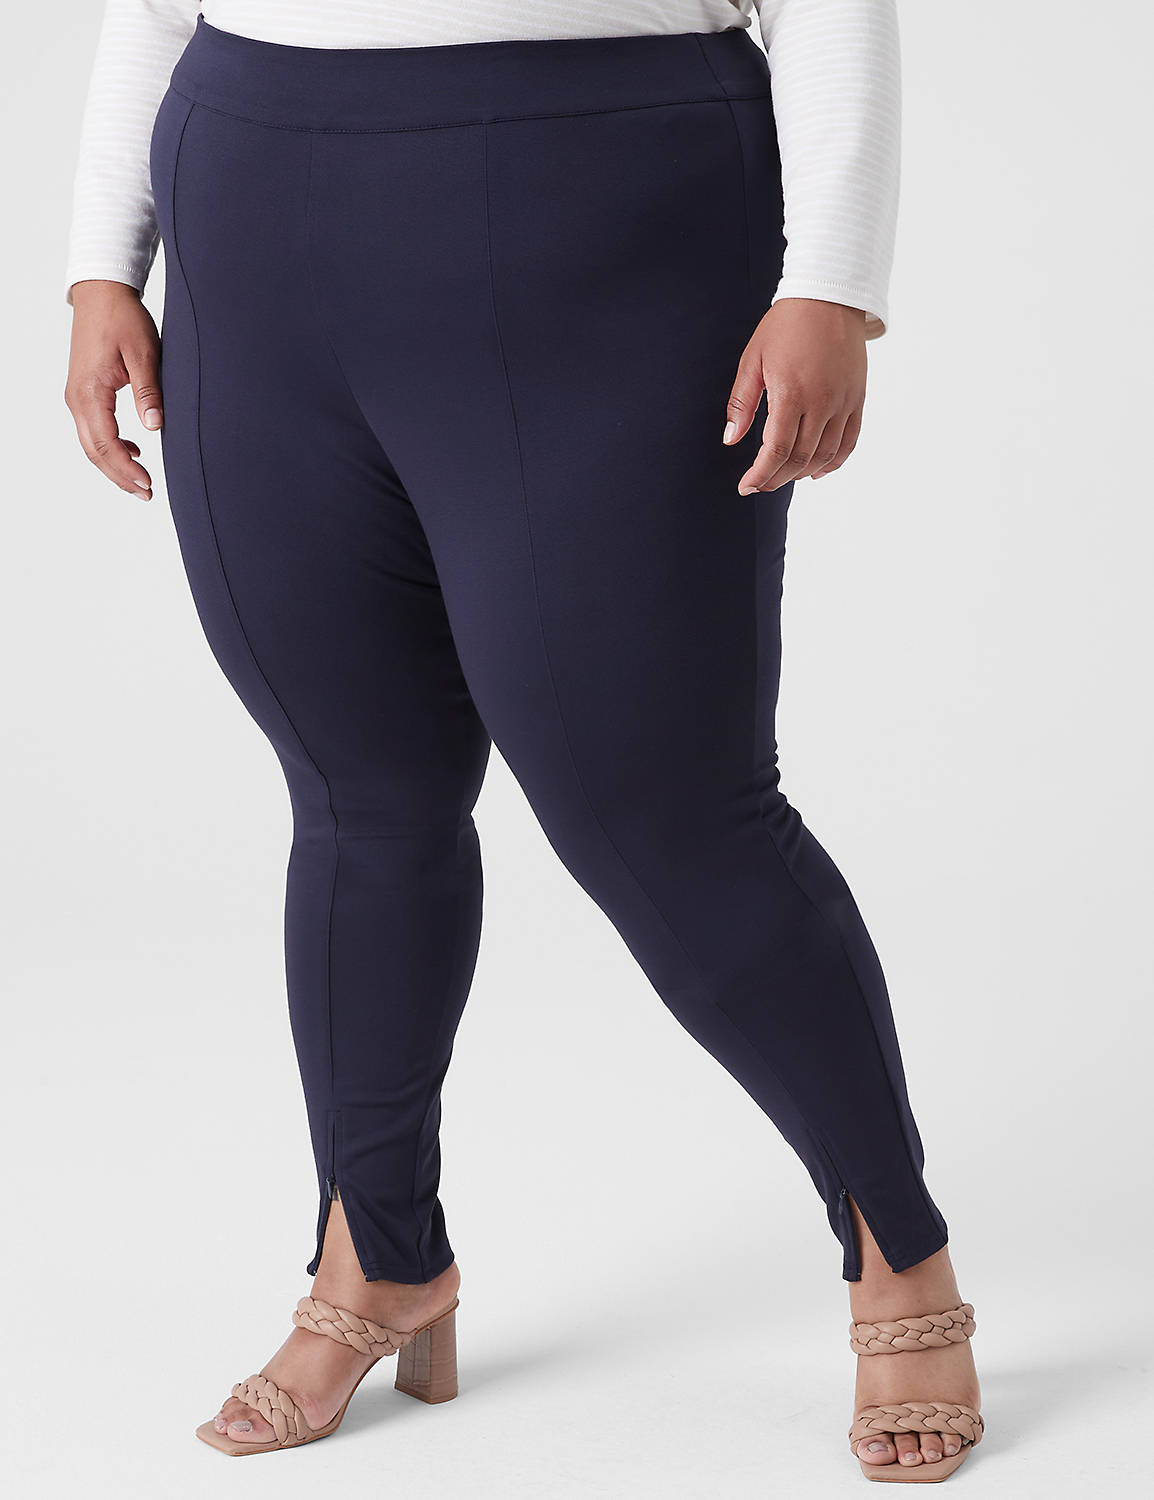 FRONT ANKLE ZIP LEGGINGS 1136319 [M Product Image 1